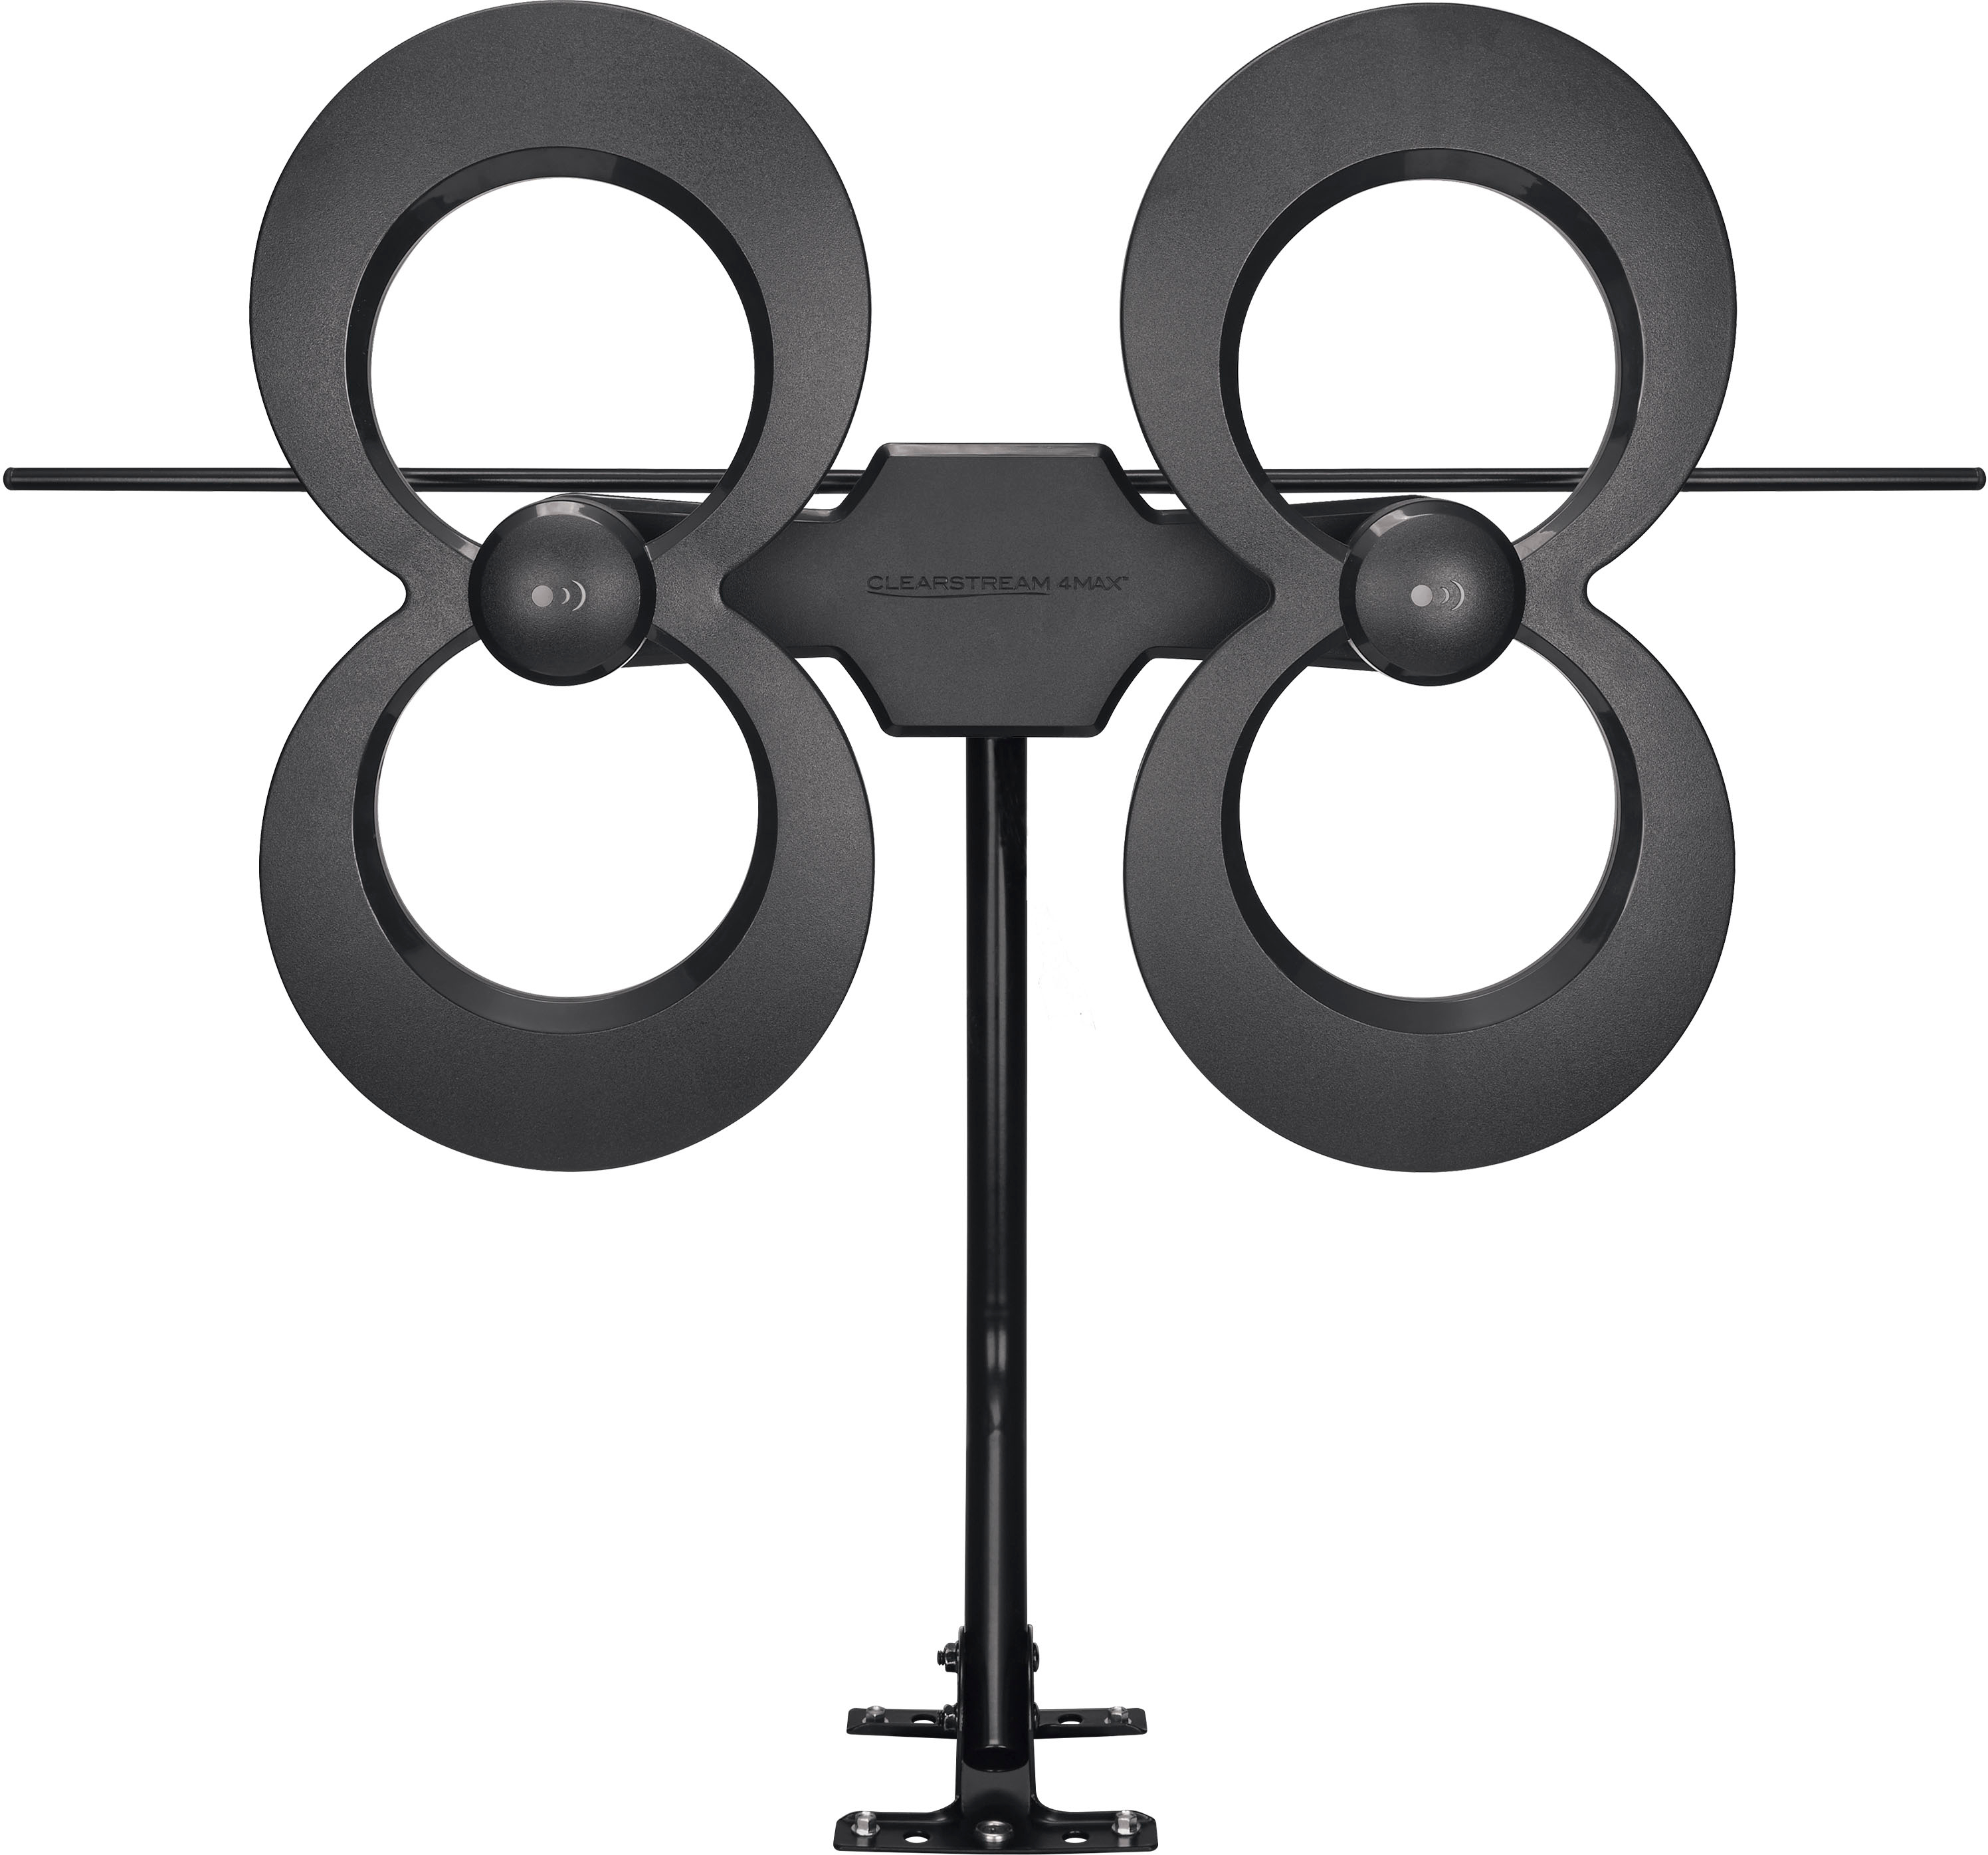 Angle View: Antennas Direct - ClearStream 4MAX Complete Amplified Indoor/Outdoor HDTV Antenna with Mast, Coaxial Cable, Amplifier, and 3-Way Splitter - Black